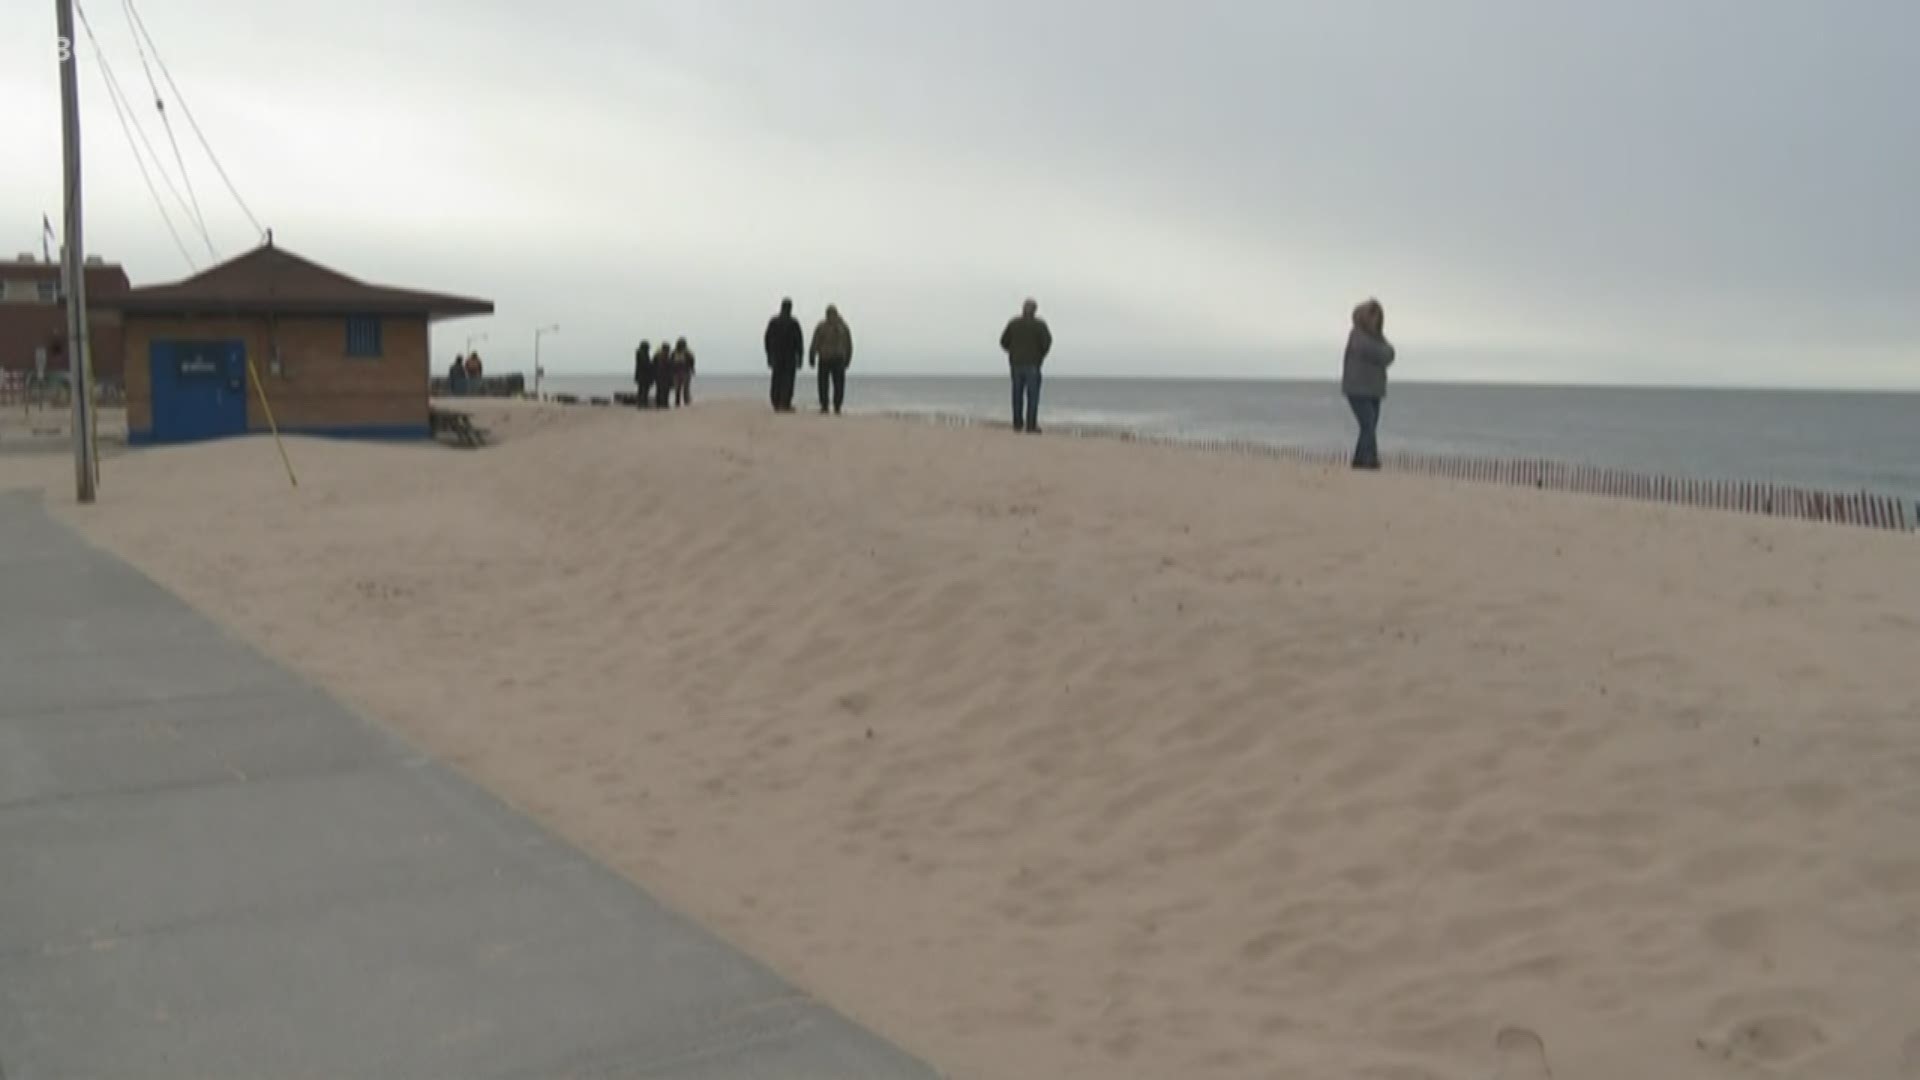 Crews were unable to search Lake Michigan to recover a 31-year-old Muskegon man that fell through the ice because of dangerous conditions Thursday.